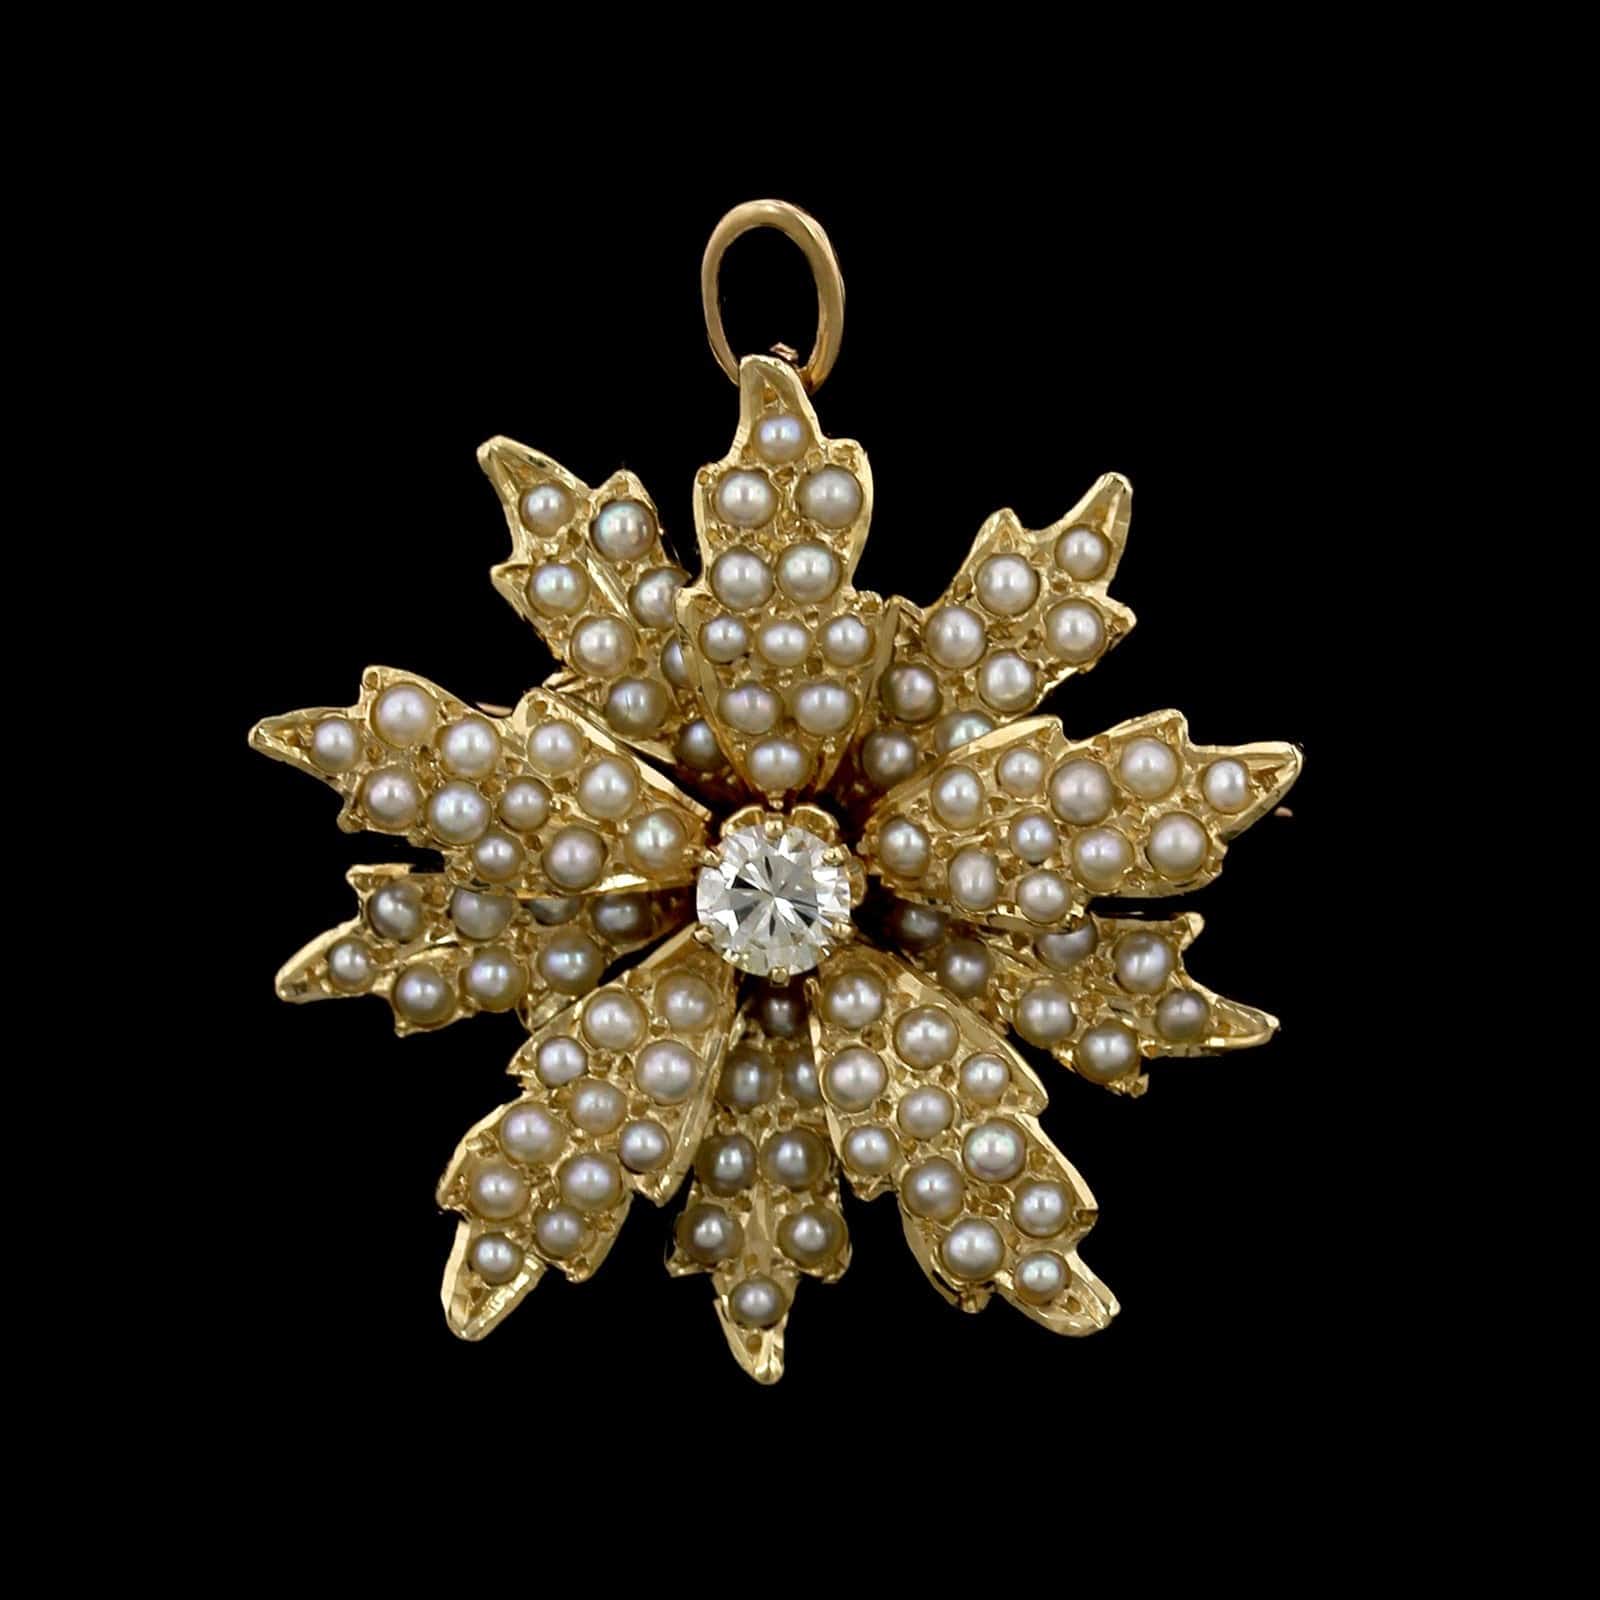 Vintage 14K Yellow Gold Estate Cultured Seed Pearl and Diamond Flower Pin/Pendant